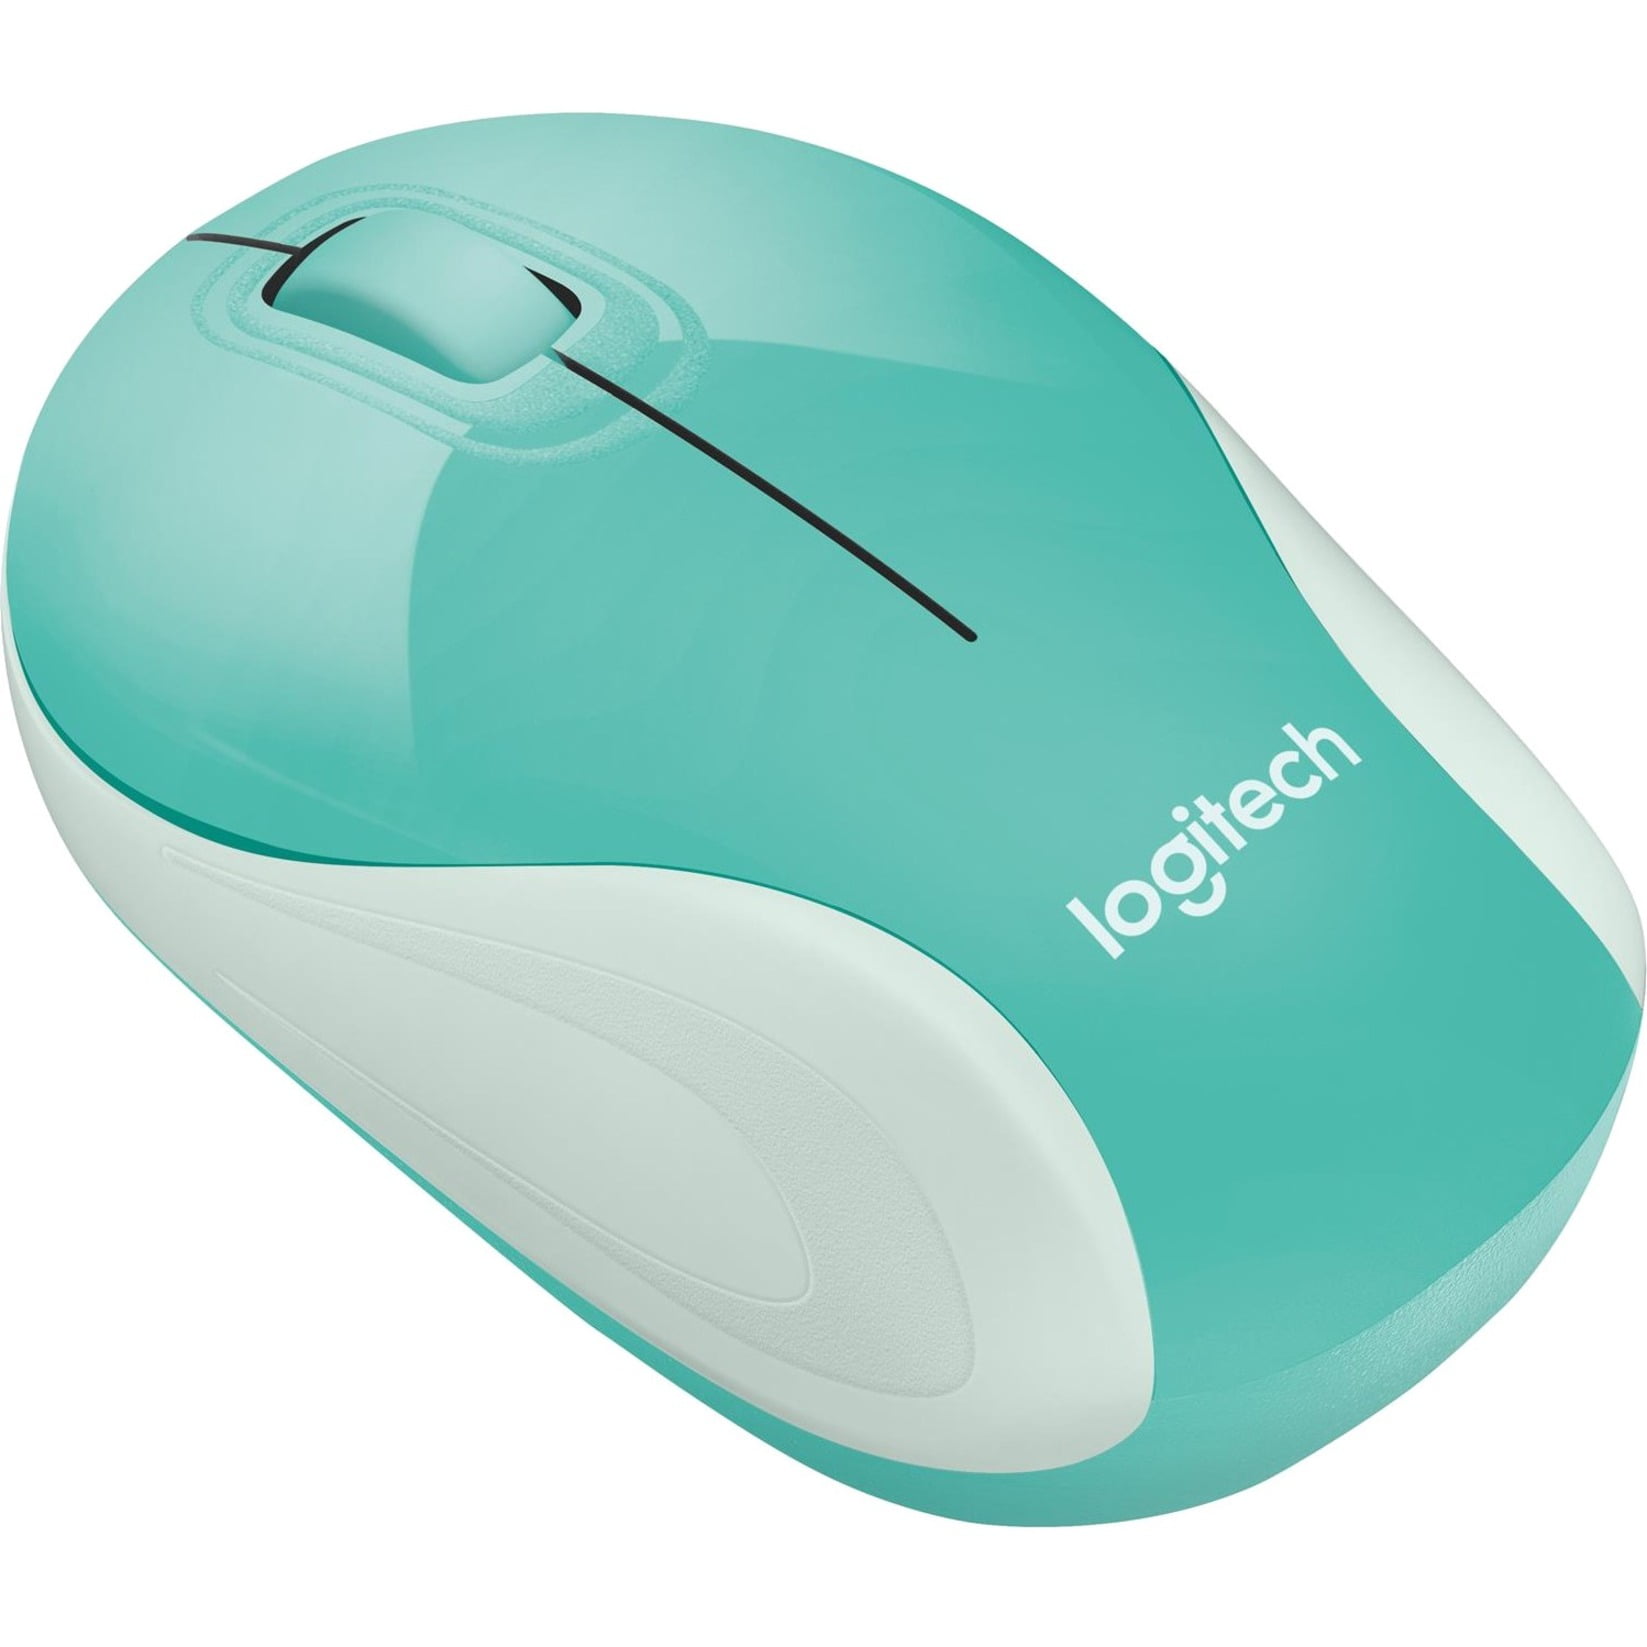 Logitech Wireless Blossom Receiver, Unifying Ultra Mini M187 USB Portable, Mouse